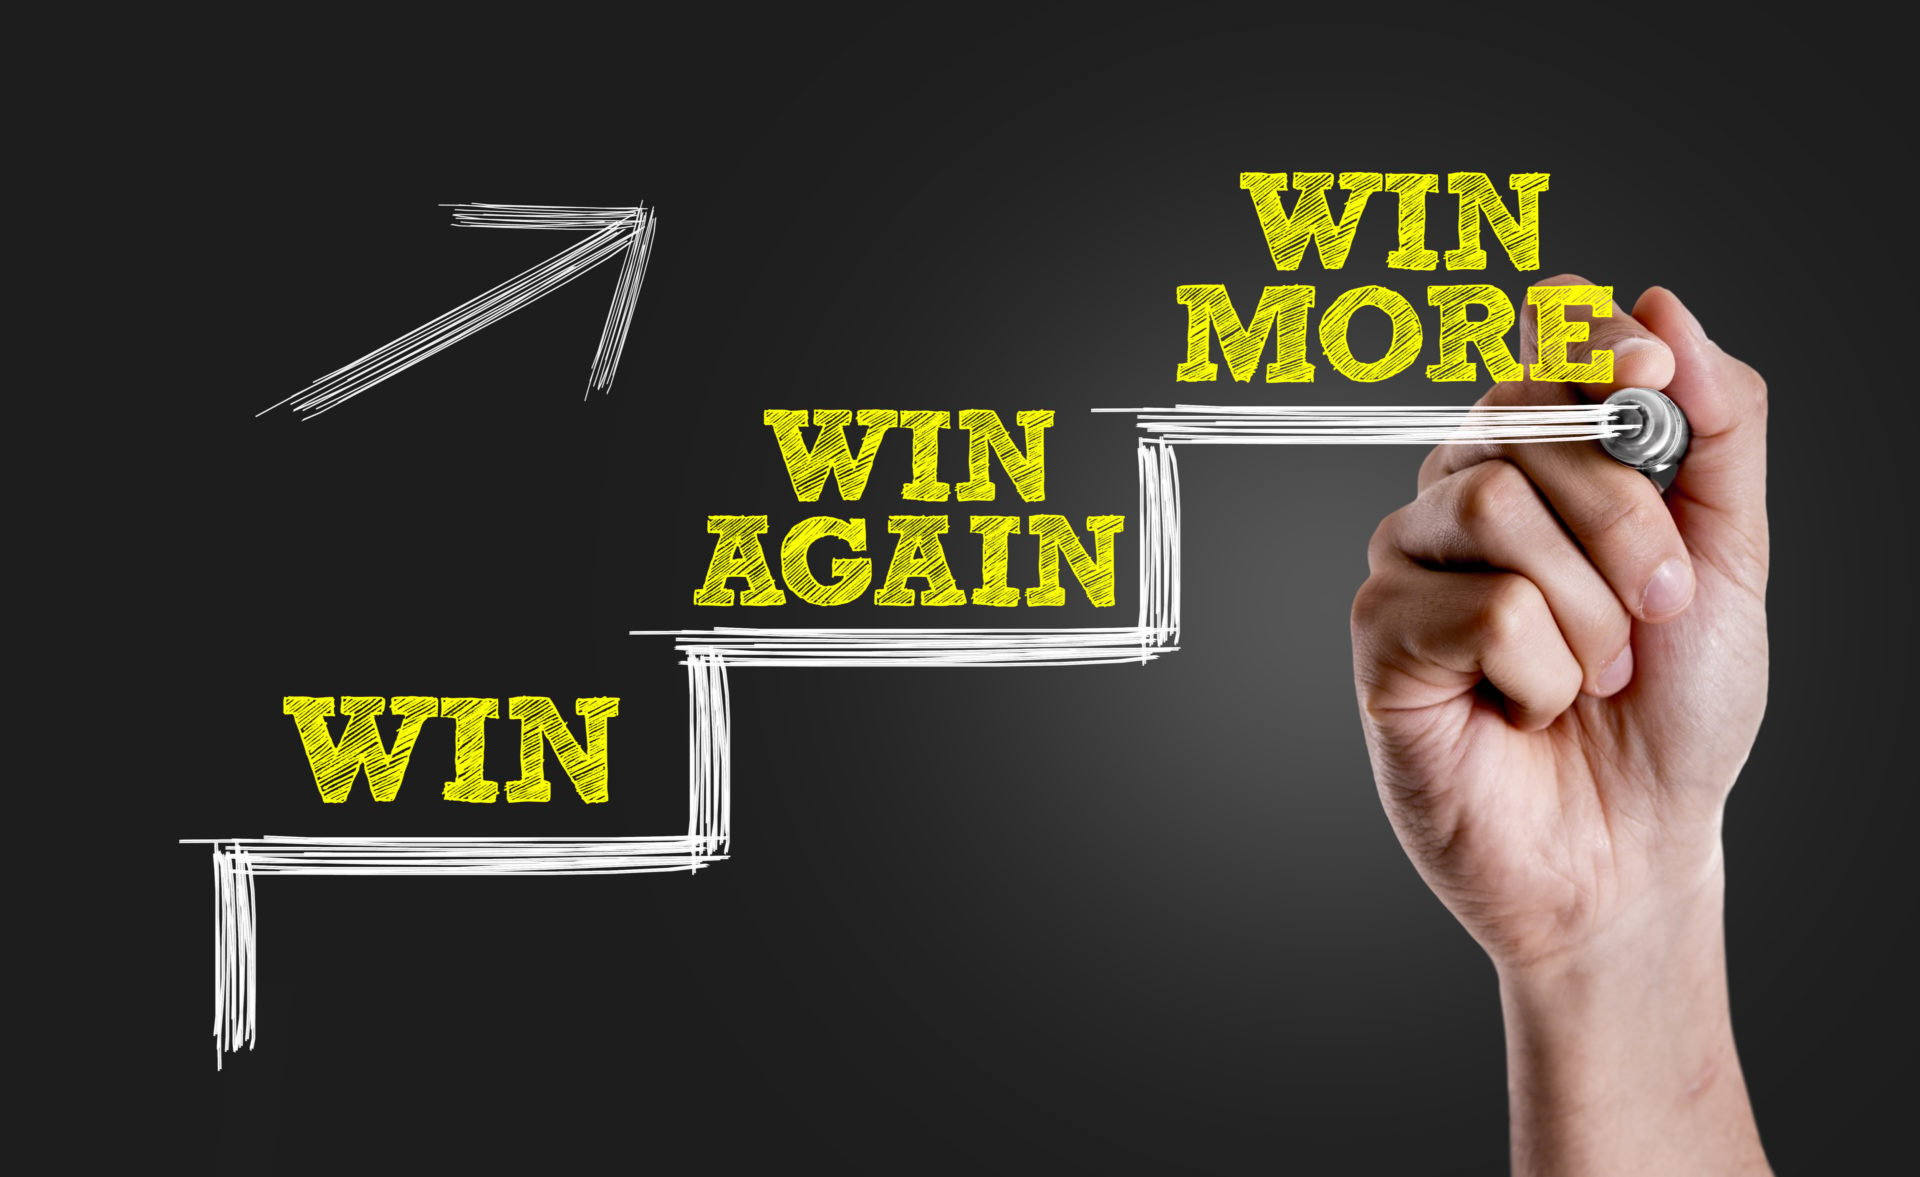 Three Ways a Siding Company Can Beat Their Competition to the Best Leads